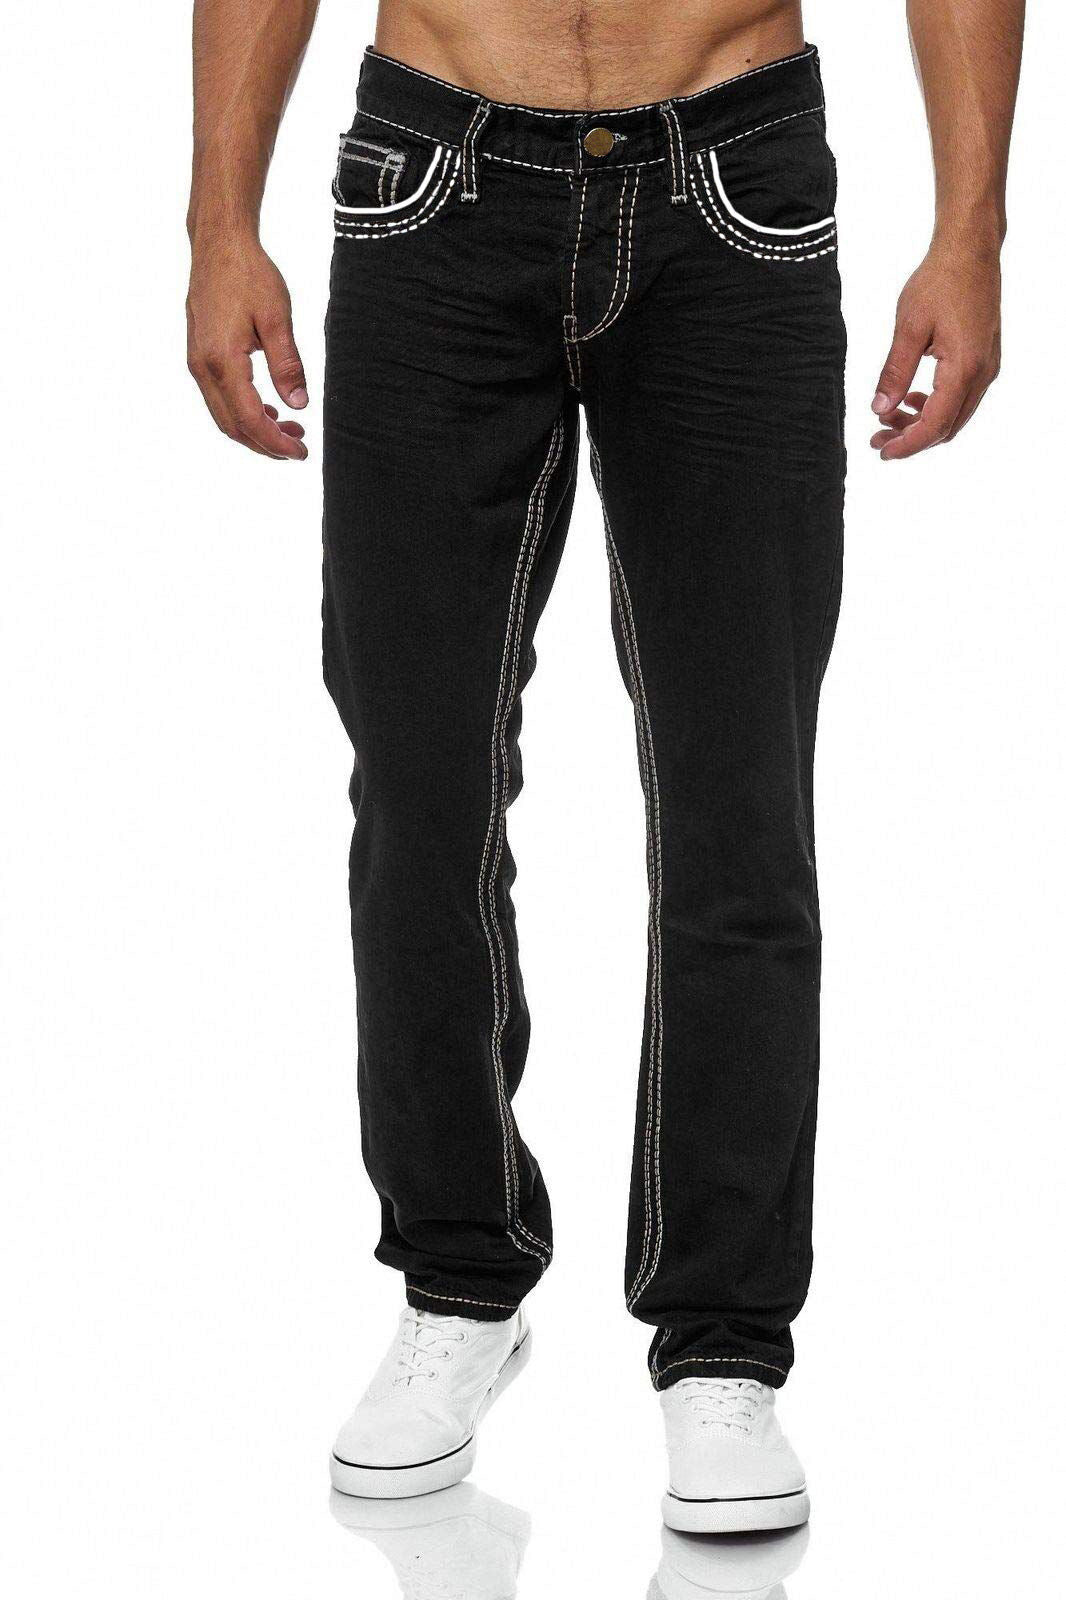 Men's Business Casual Straight Pants with Pockets - Daily Streetwear Trousers